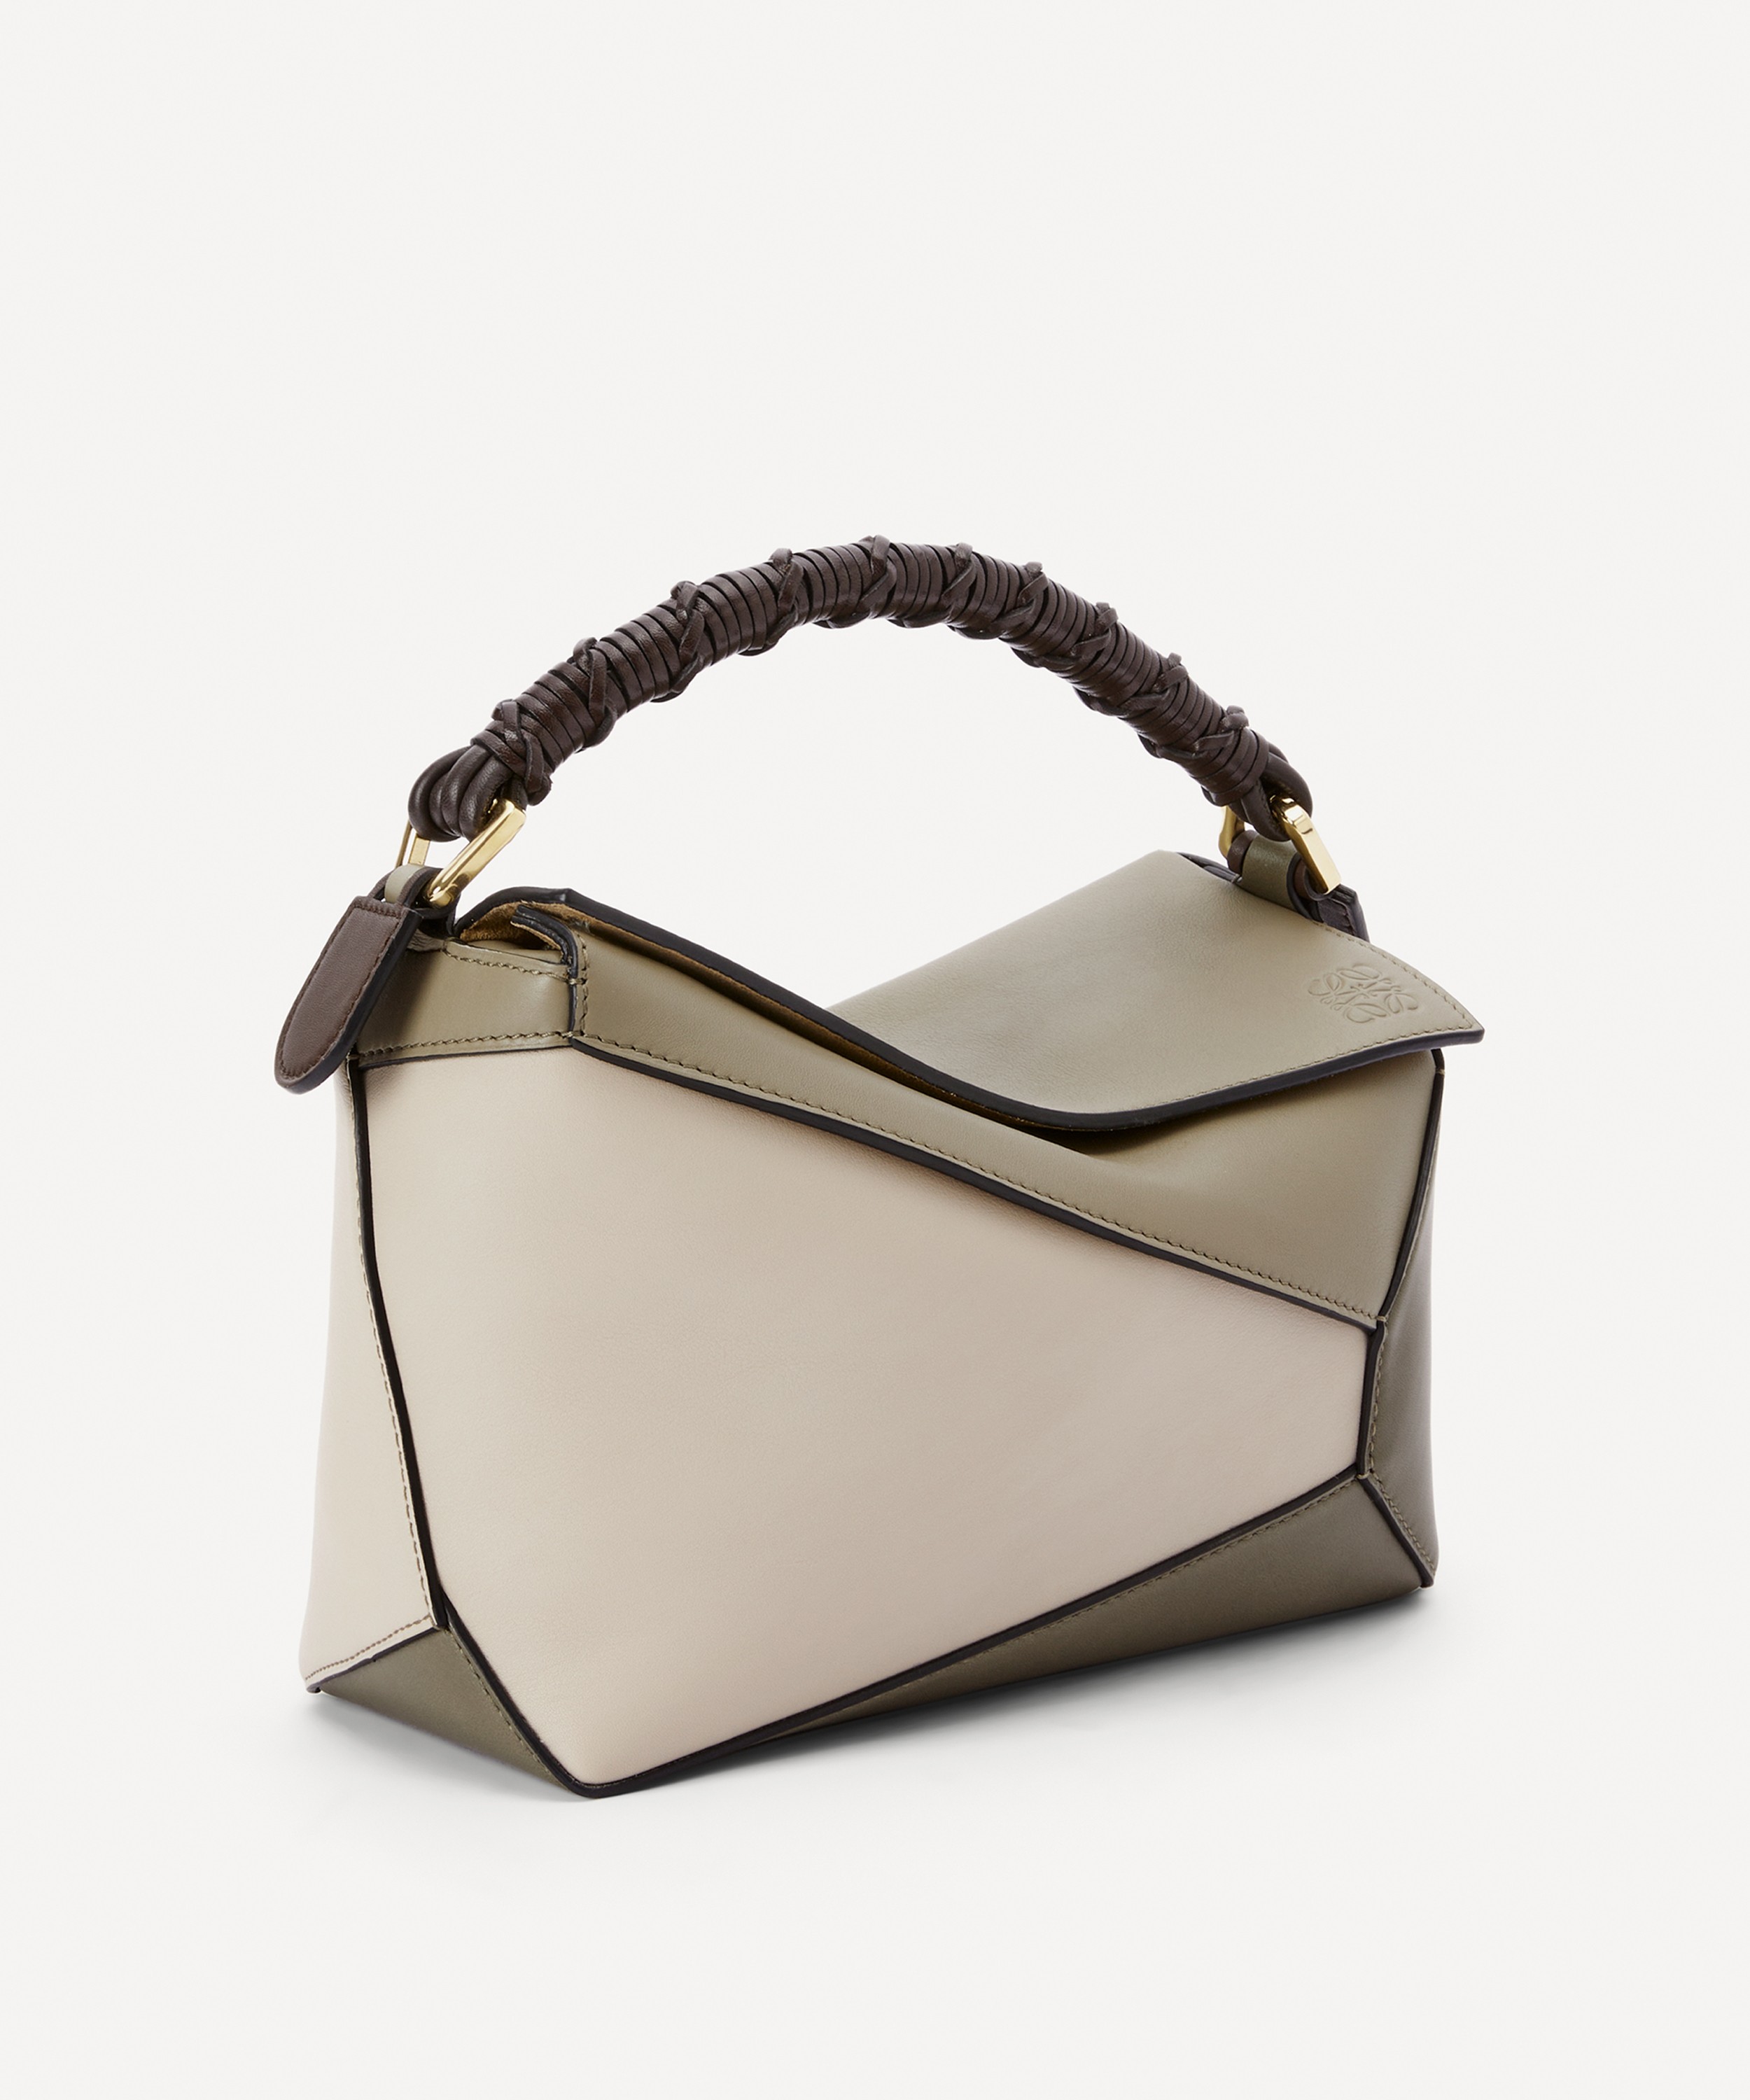 Loewe Puzzle Small Bag In Green